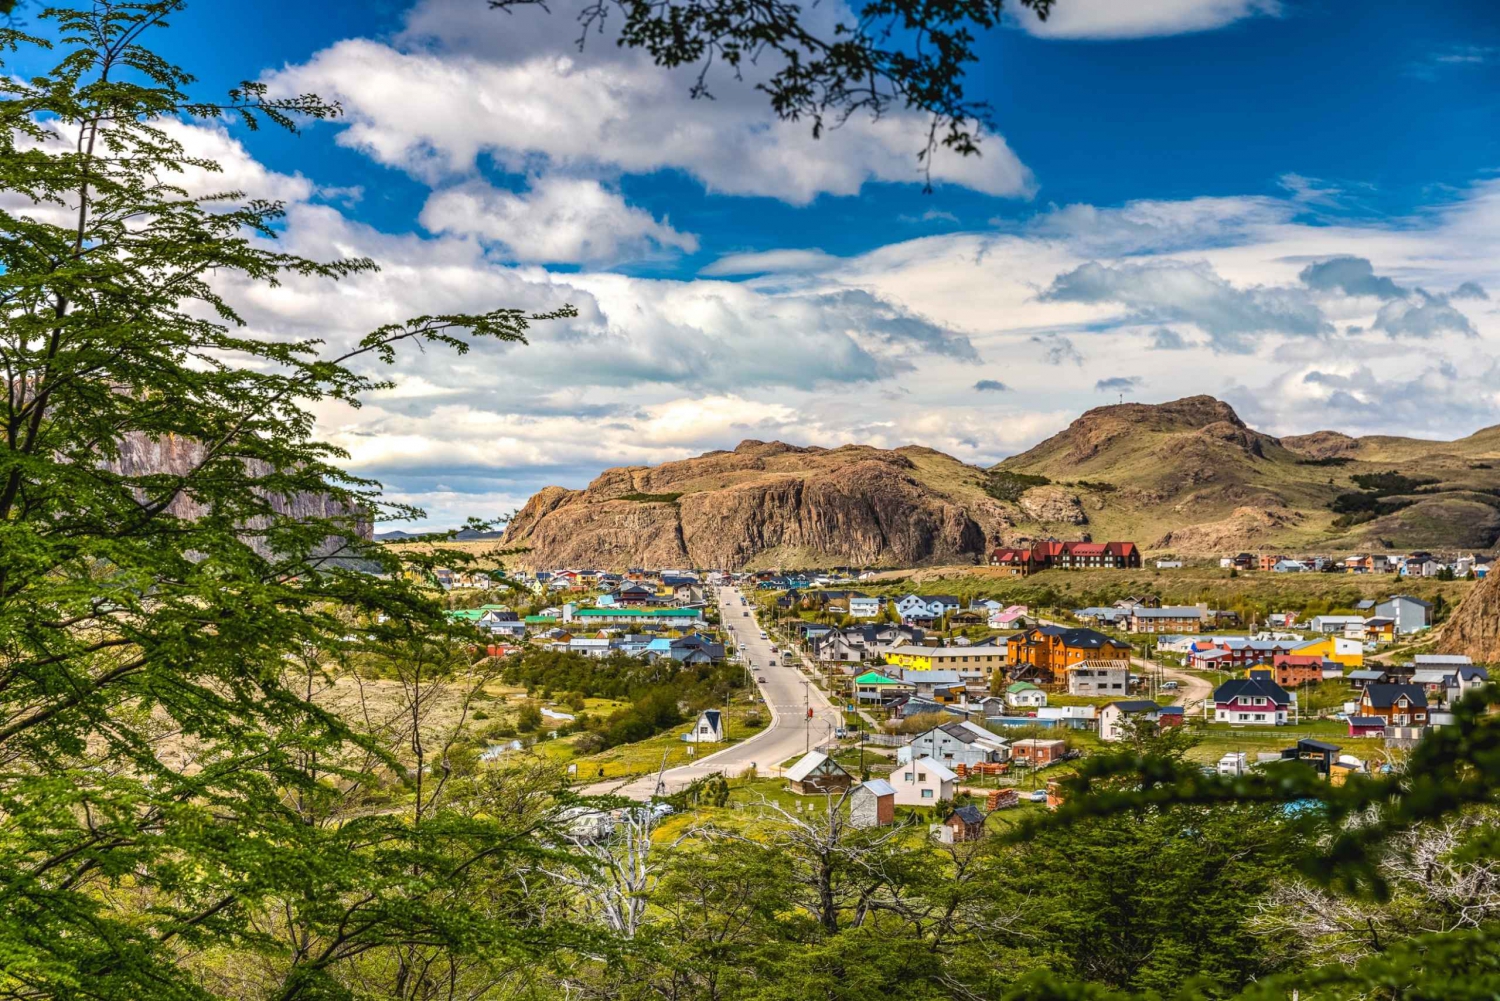 From El Calafate: Full-Day Private Transfer to El Chaltén